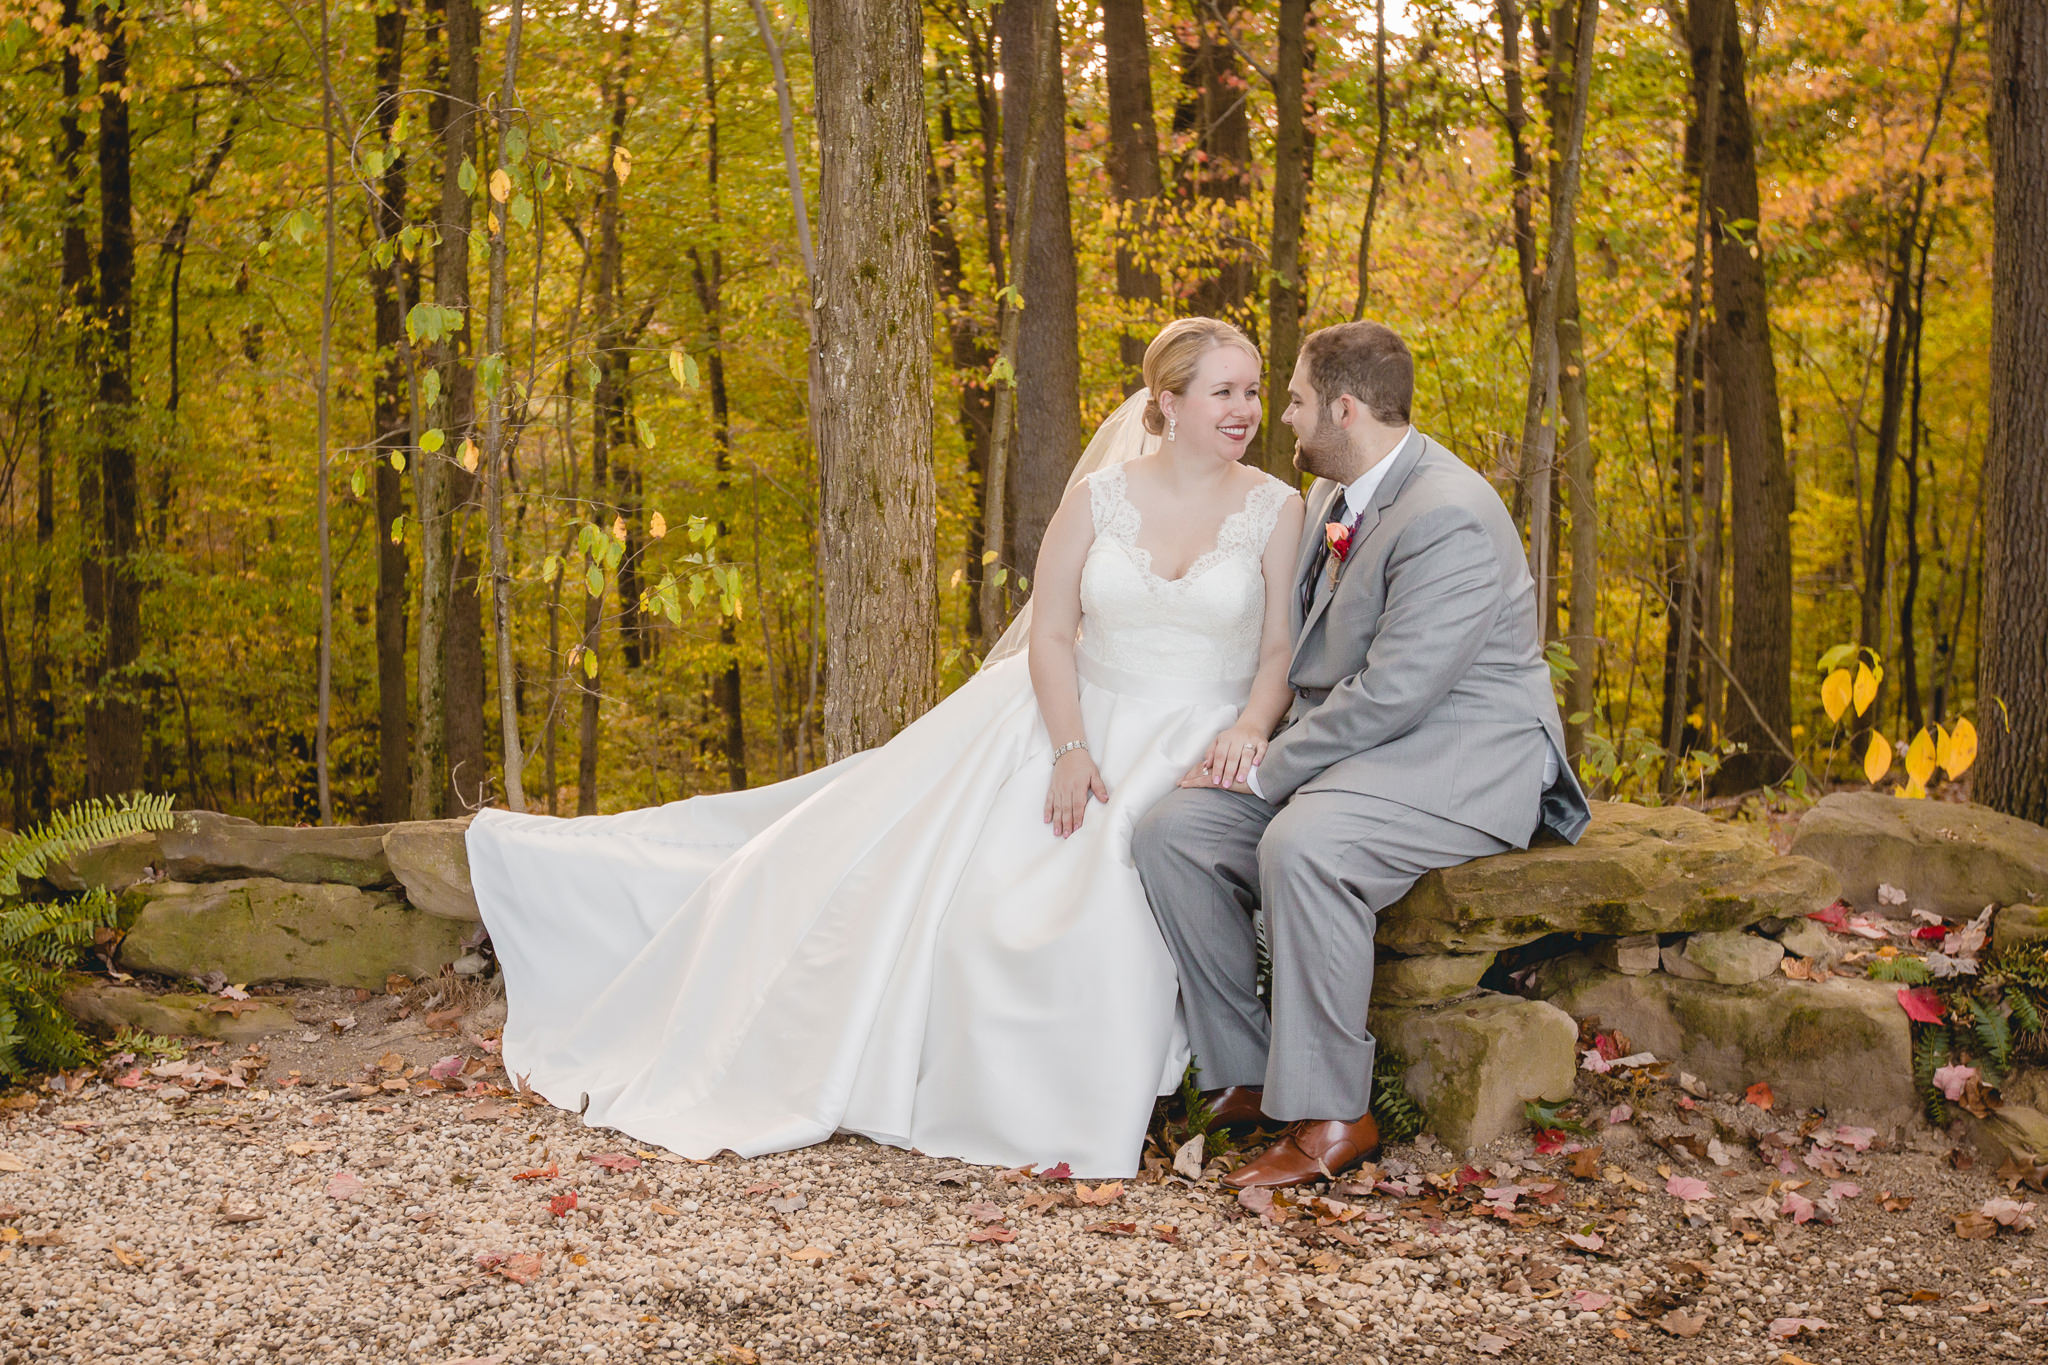 Rustic woodsy wedding portraits at the Barn at Soergel Hollow